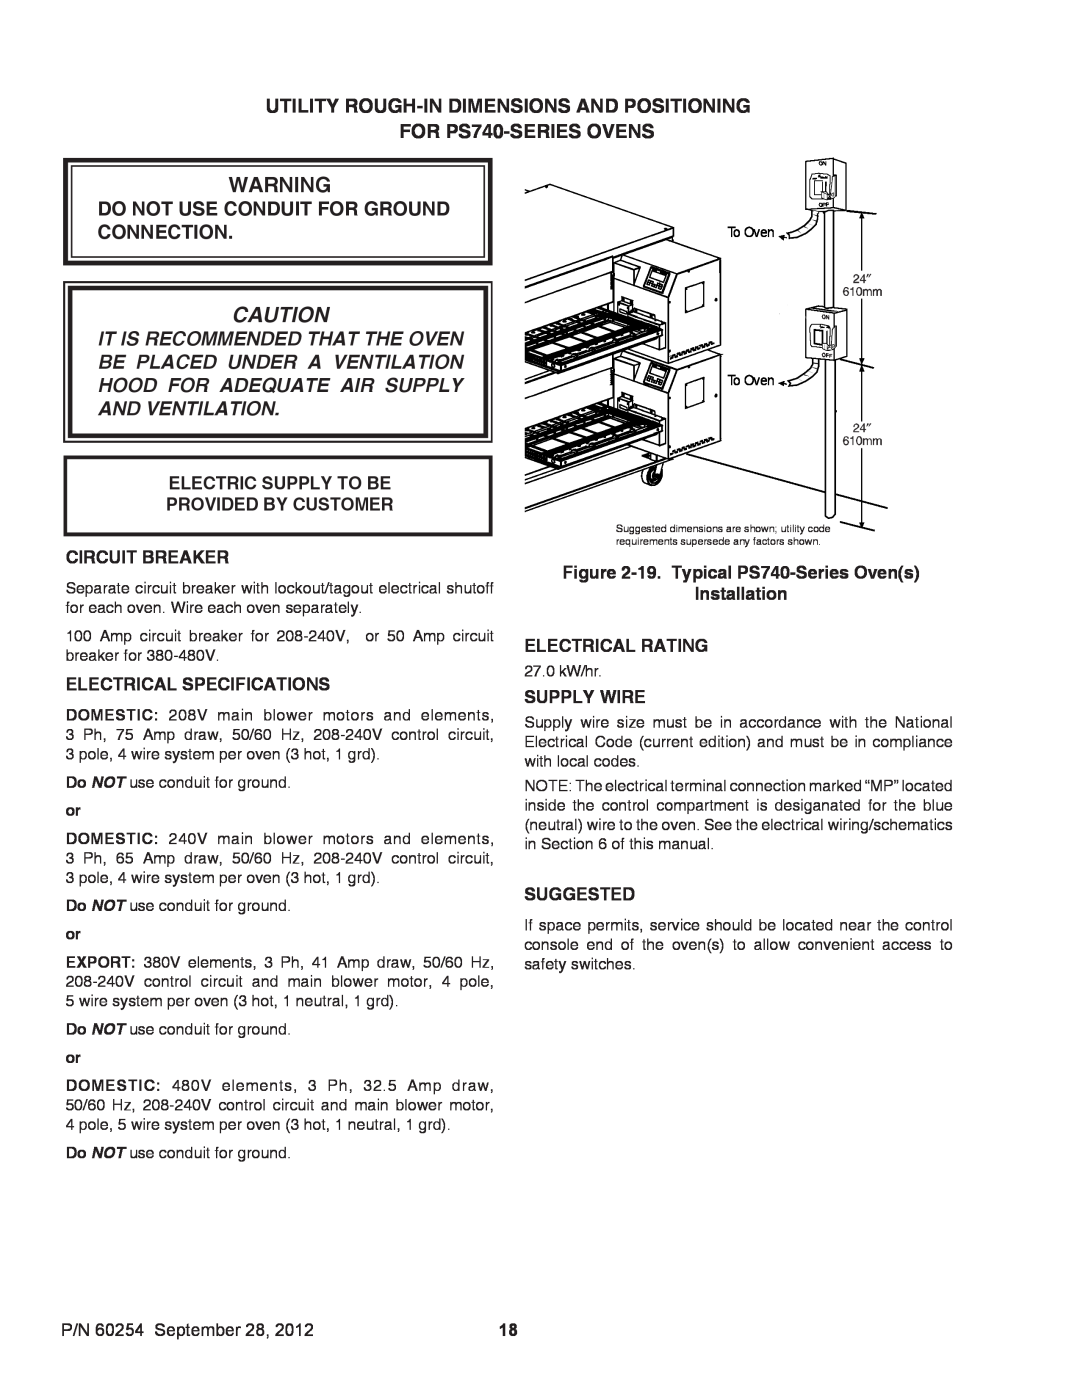 Middleby Marshall 60254 Do Not Use Conduit For Ground Connection, Electrical Specifications, Electrical Rating, Suggested 